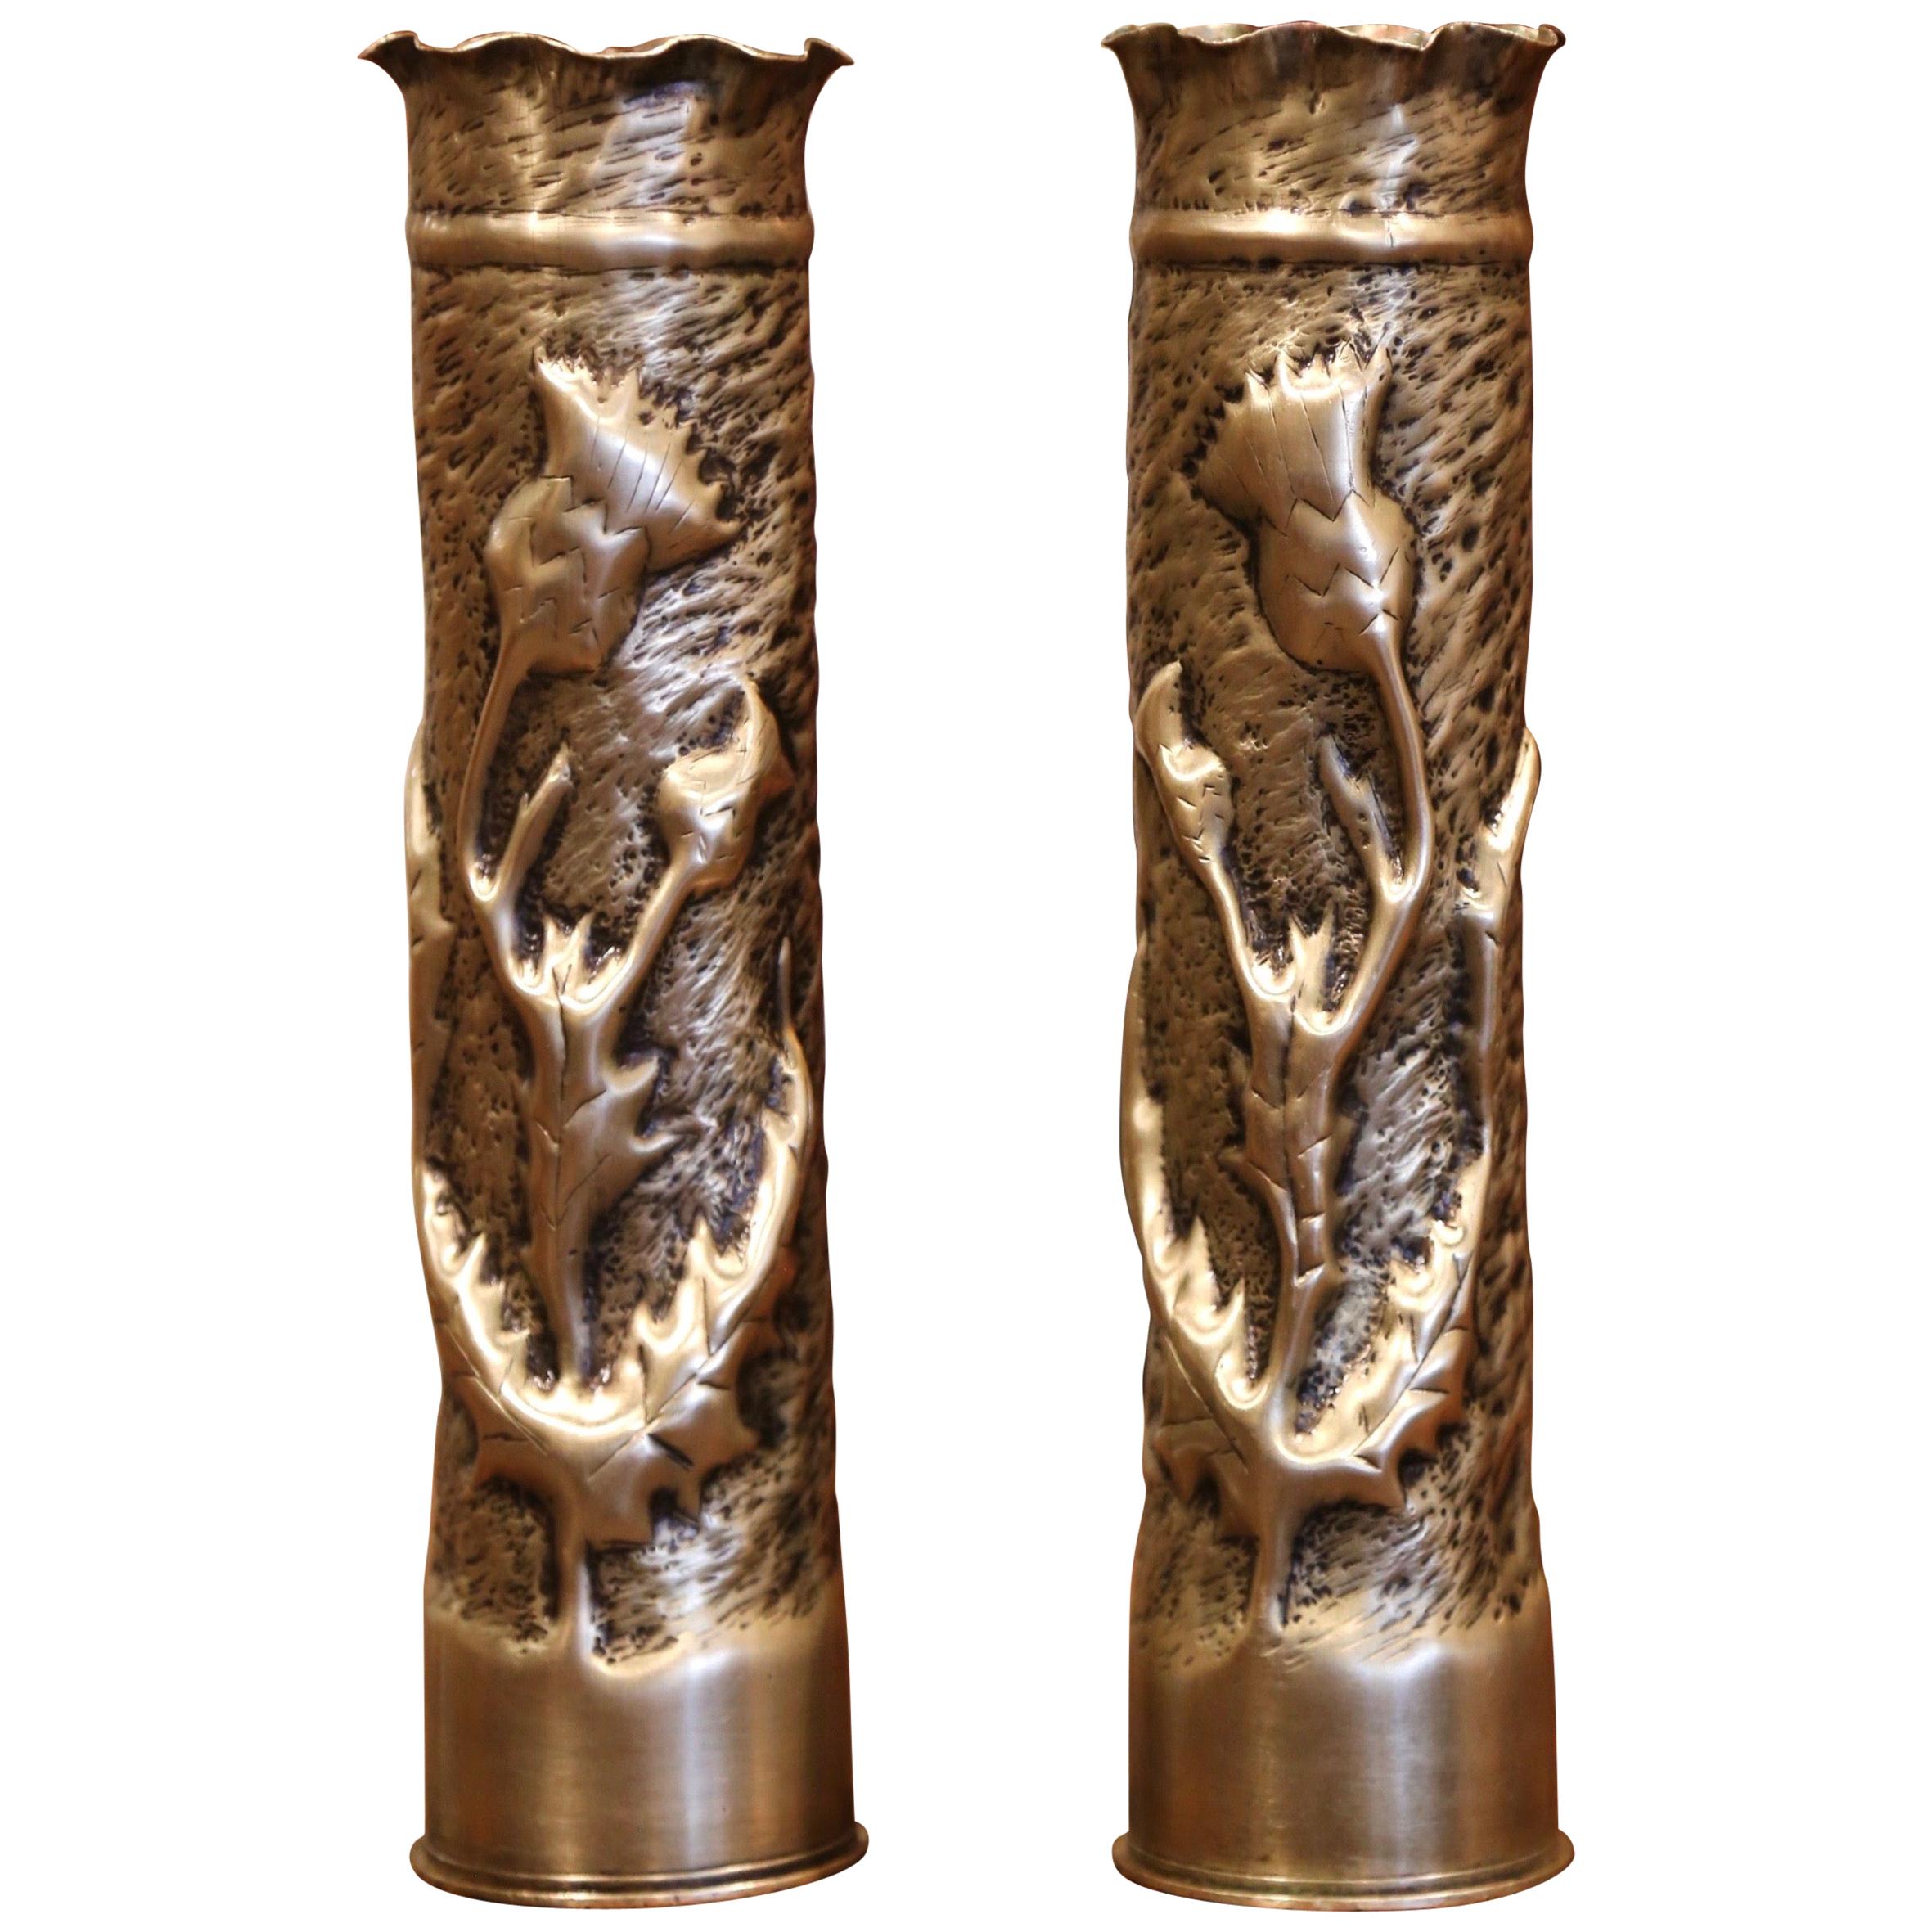 World War I French Trench Artillery Brass Shell Casing Vases with Foliage Motifs